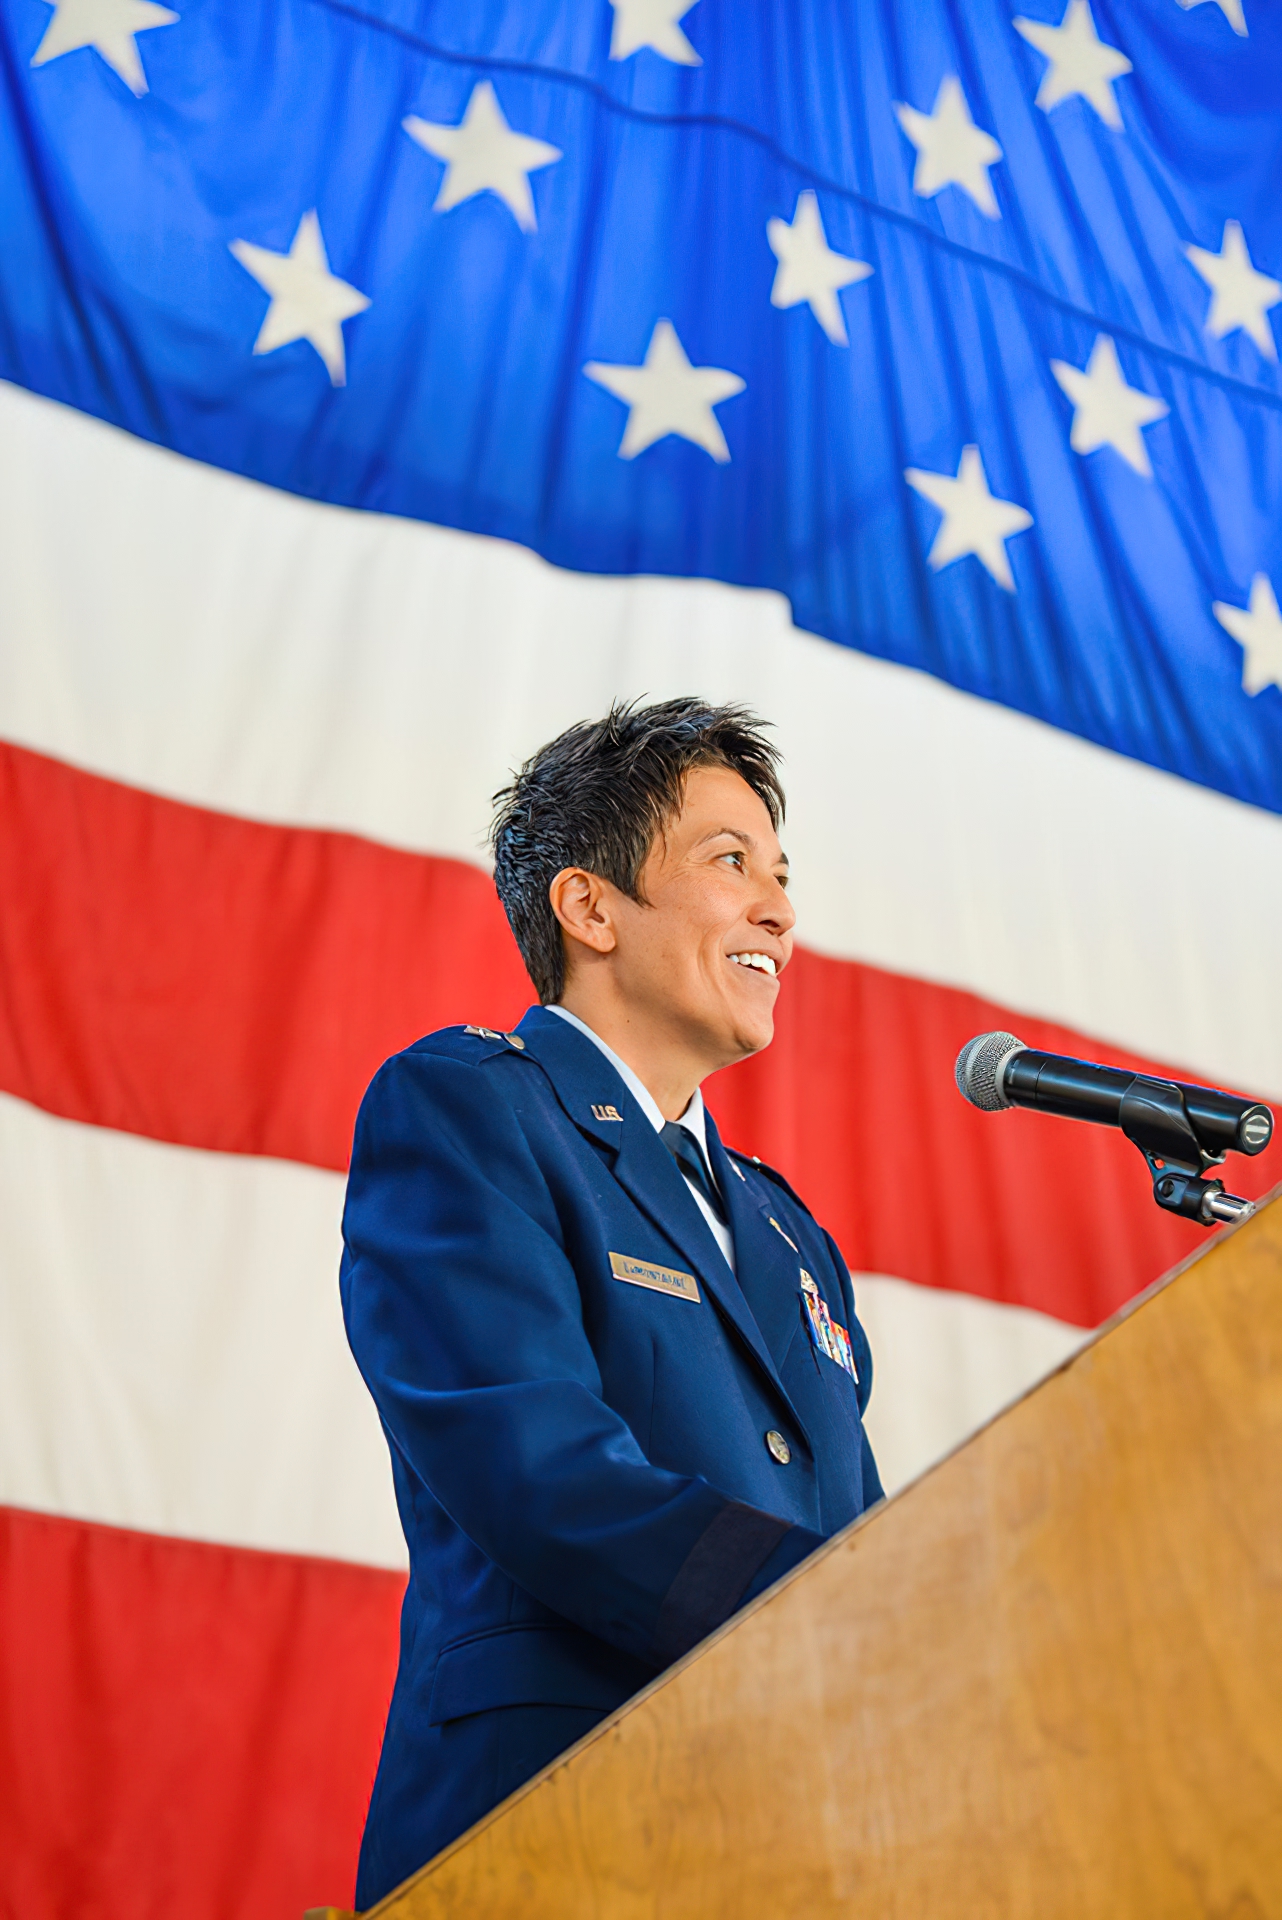 Michele LaMontagne, the first female commander in the New Mexico Air National Guard, November 2019.